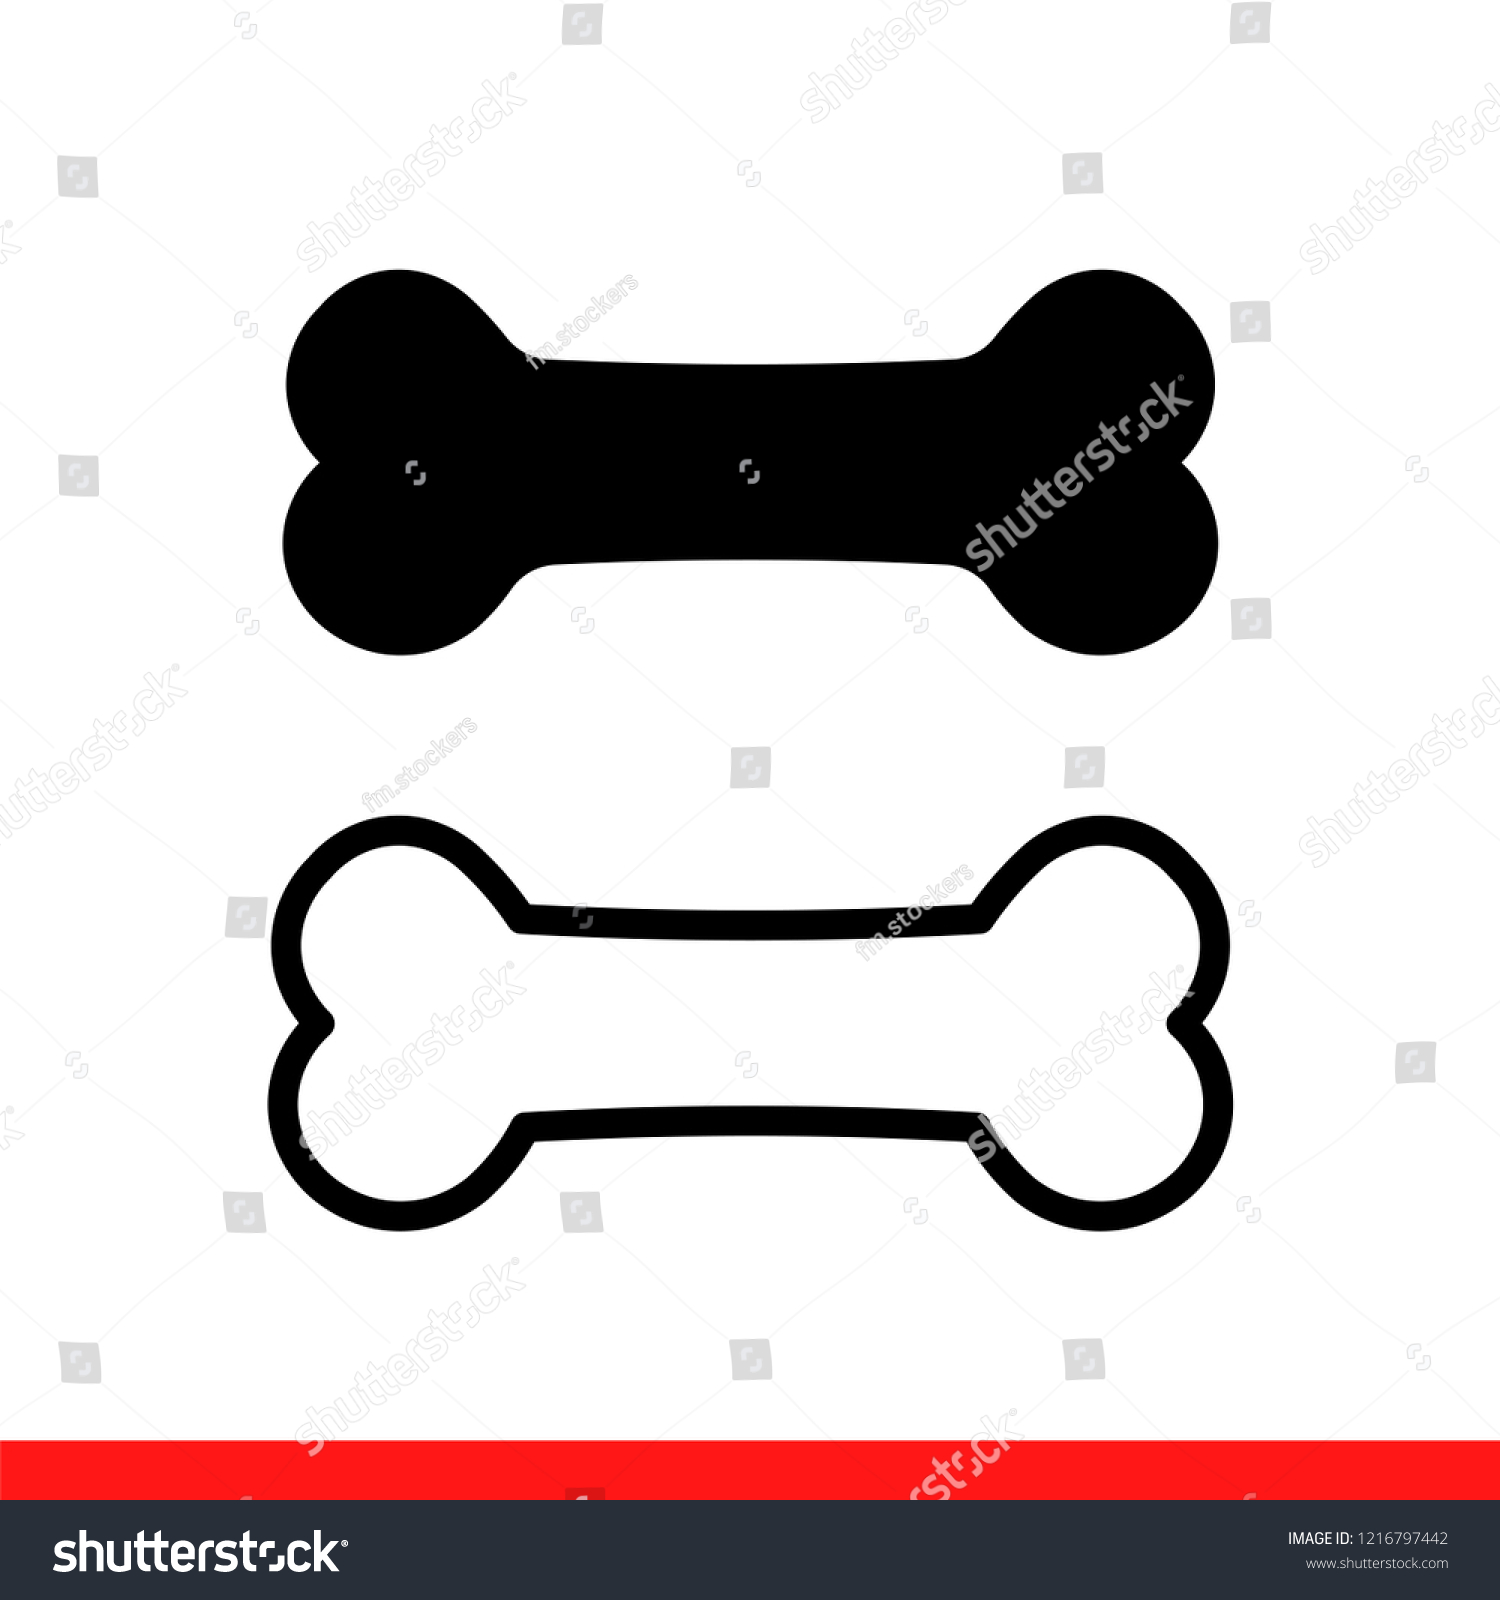 Dog bone icon in modern flat design isolated on white background, pet food vector illustration for web site or mobile app #1216797442